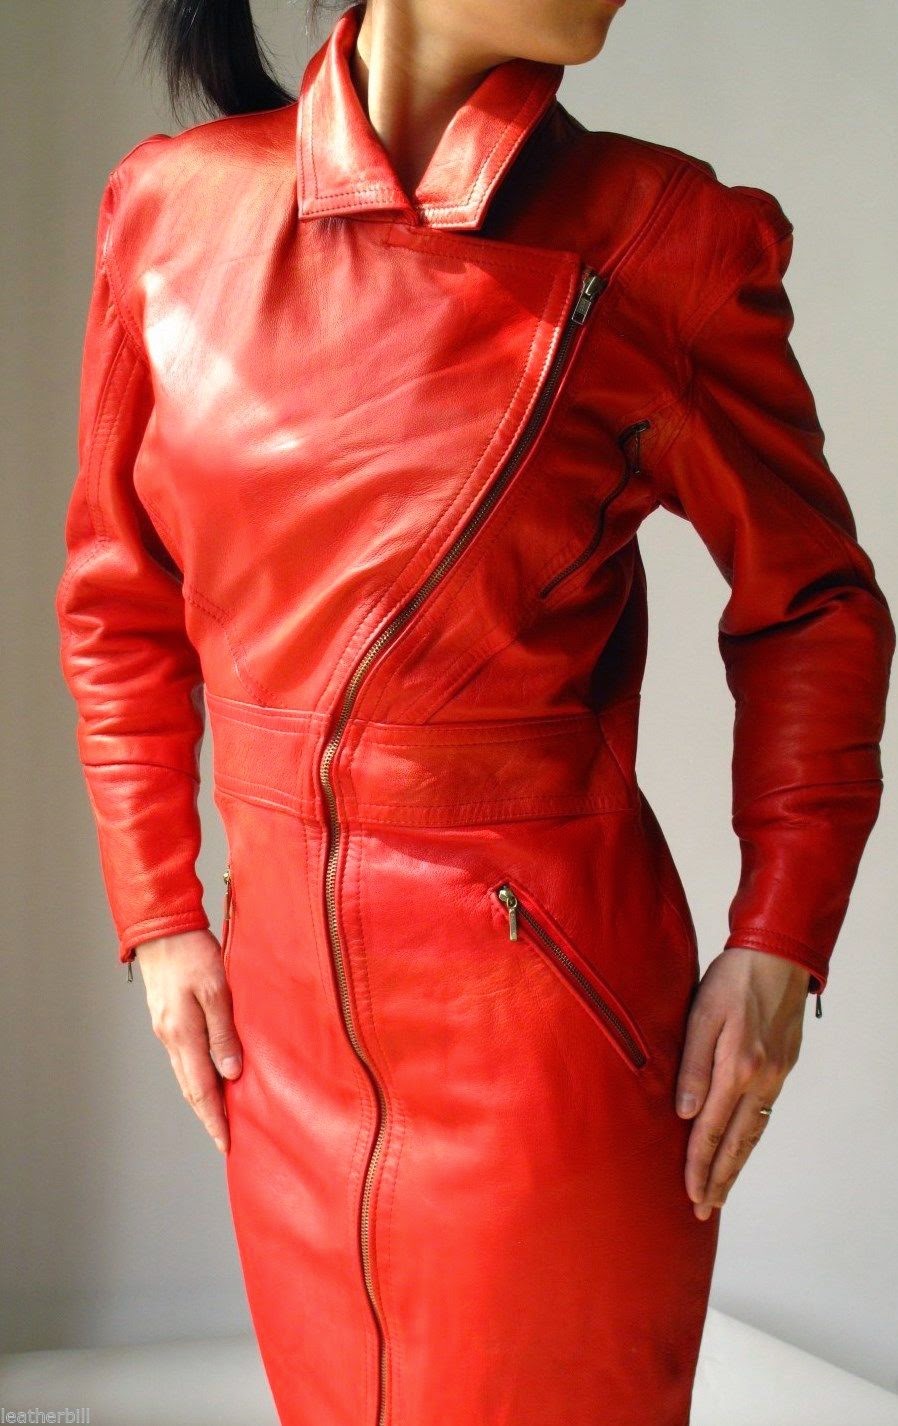 eBay Leather: A nicely modeled red leather biker-style dress sells well